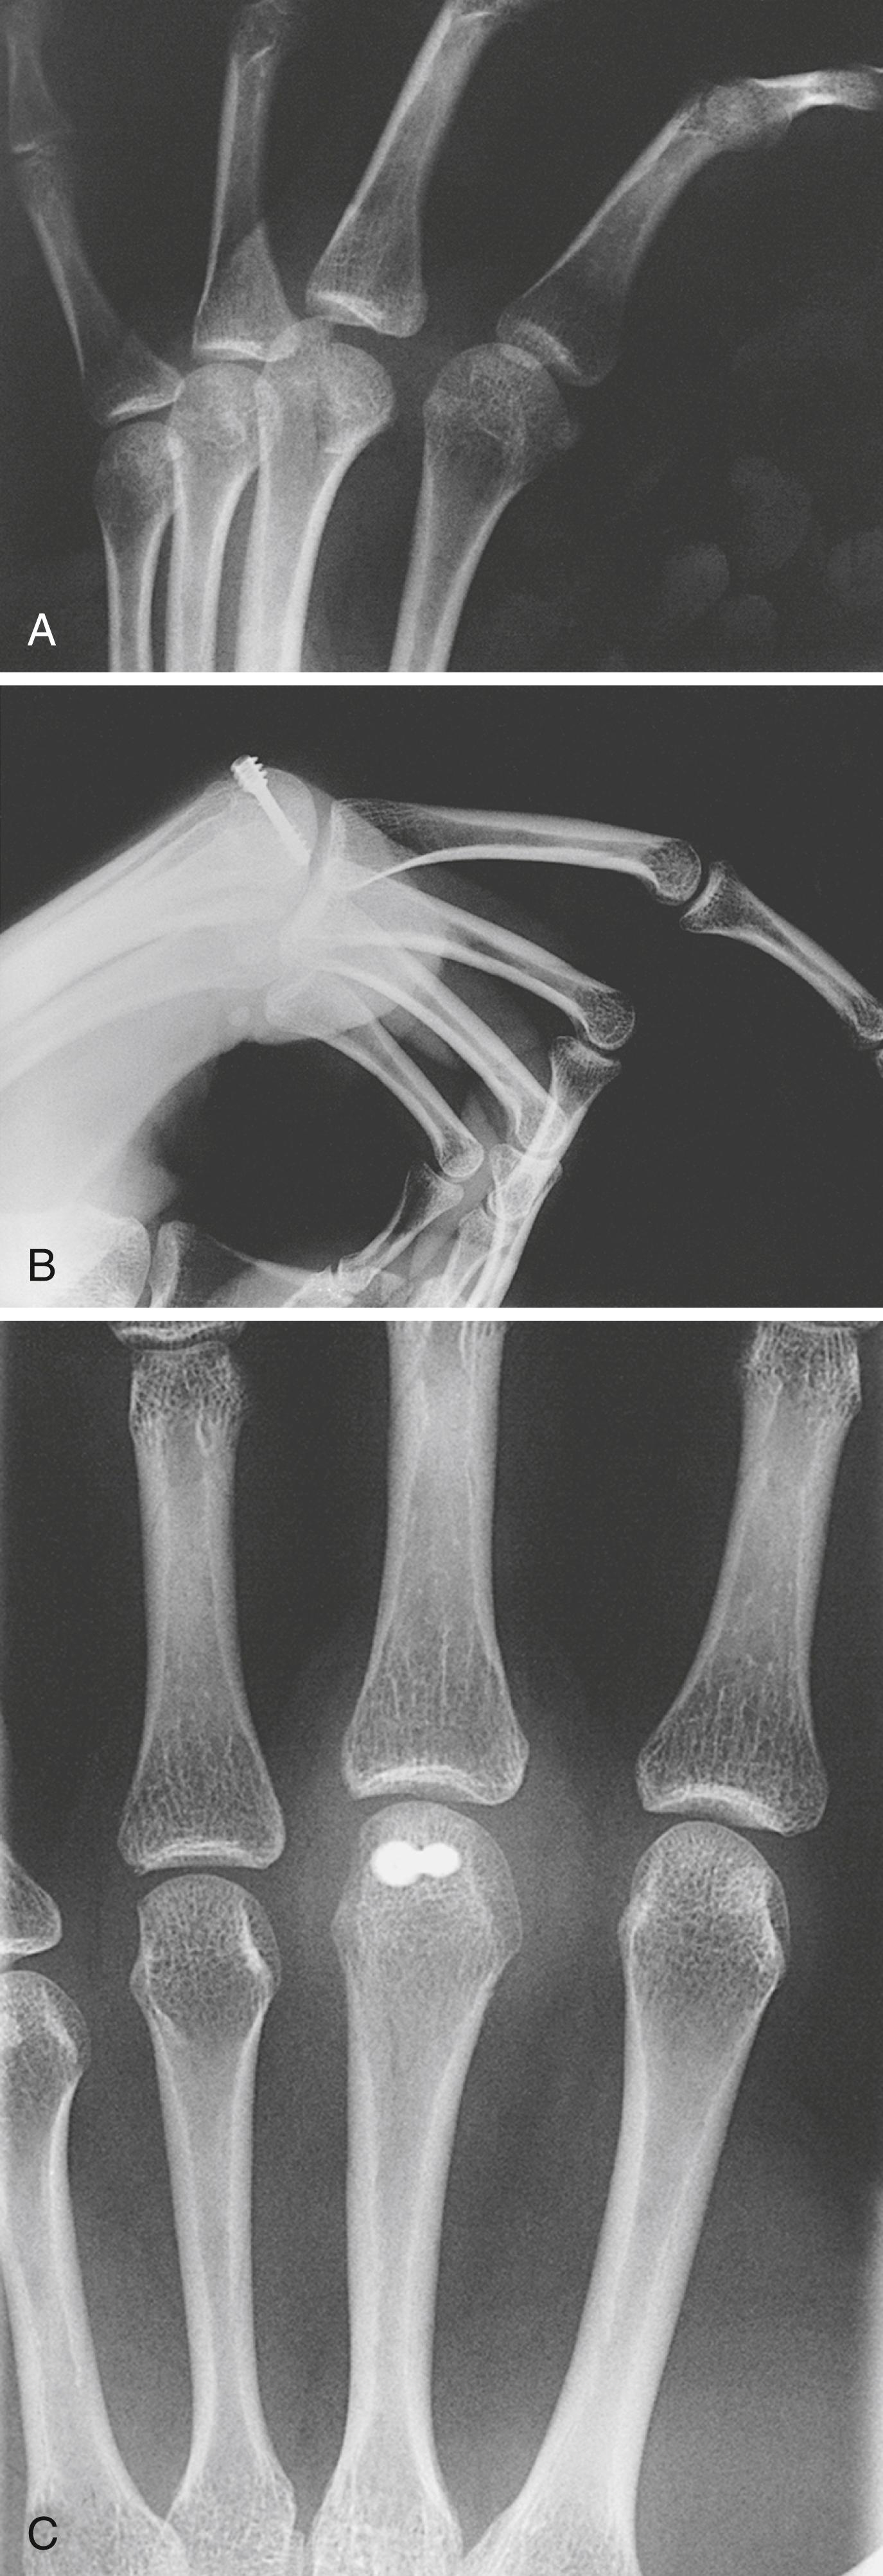 Fig. 7.1, A, Displaced, articular sagittal slice fracture of middle finger metacarpal head. B and C, Postoperative posteroanterior (B) and lateral (C) views show anatomic reduction and fixation with headless screw. Full MCP mobility was restored.